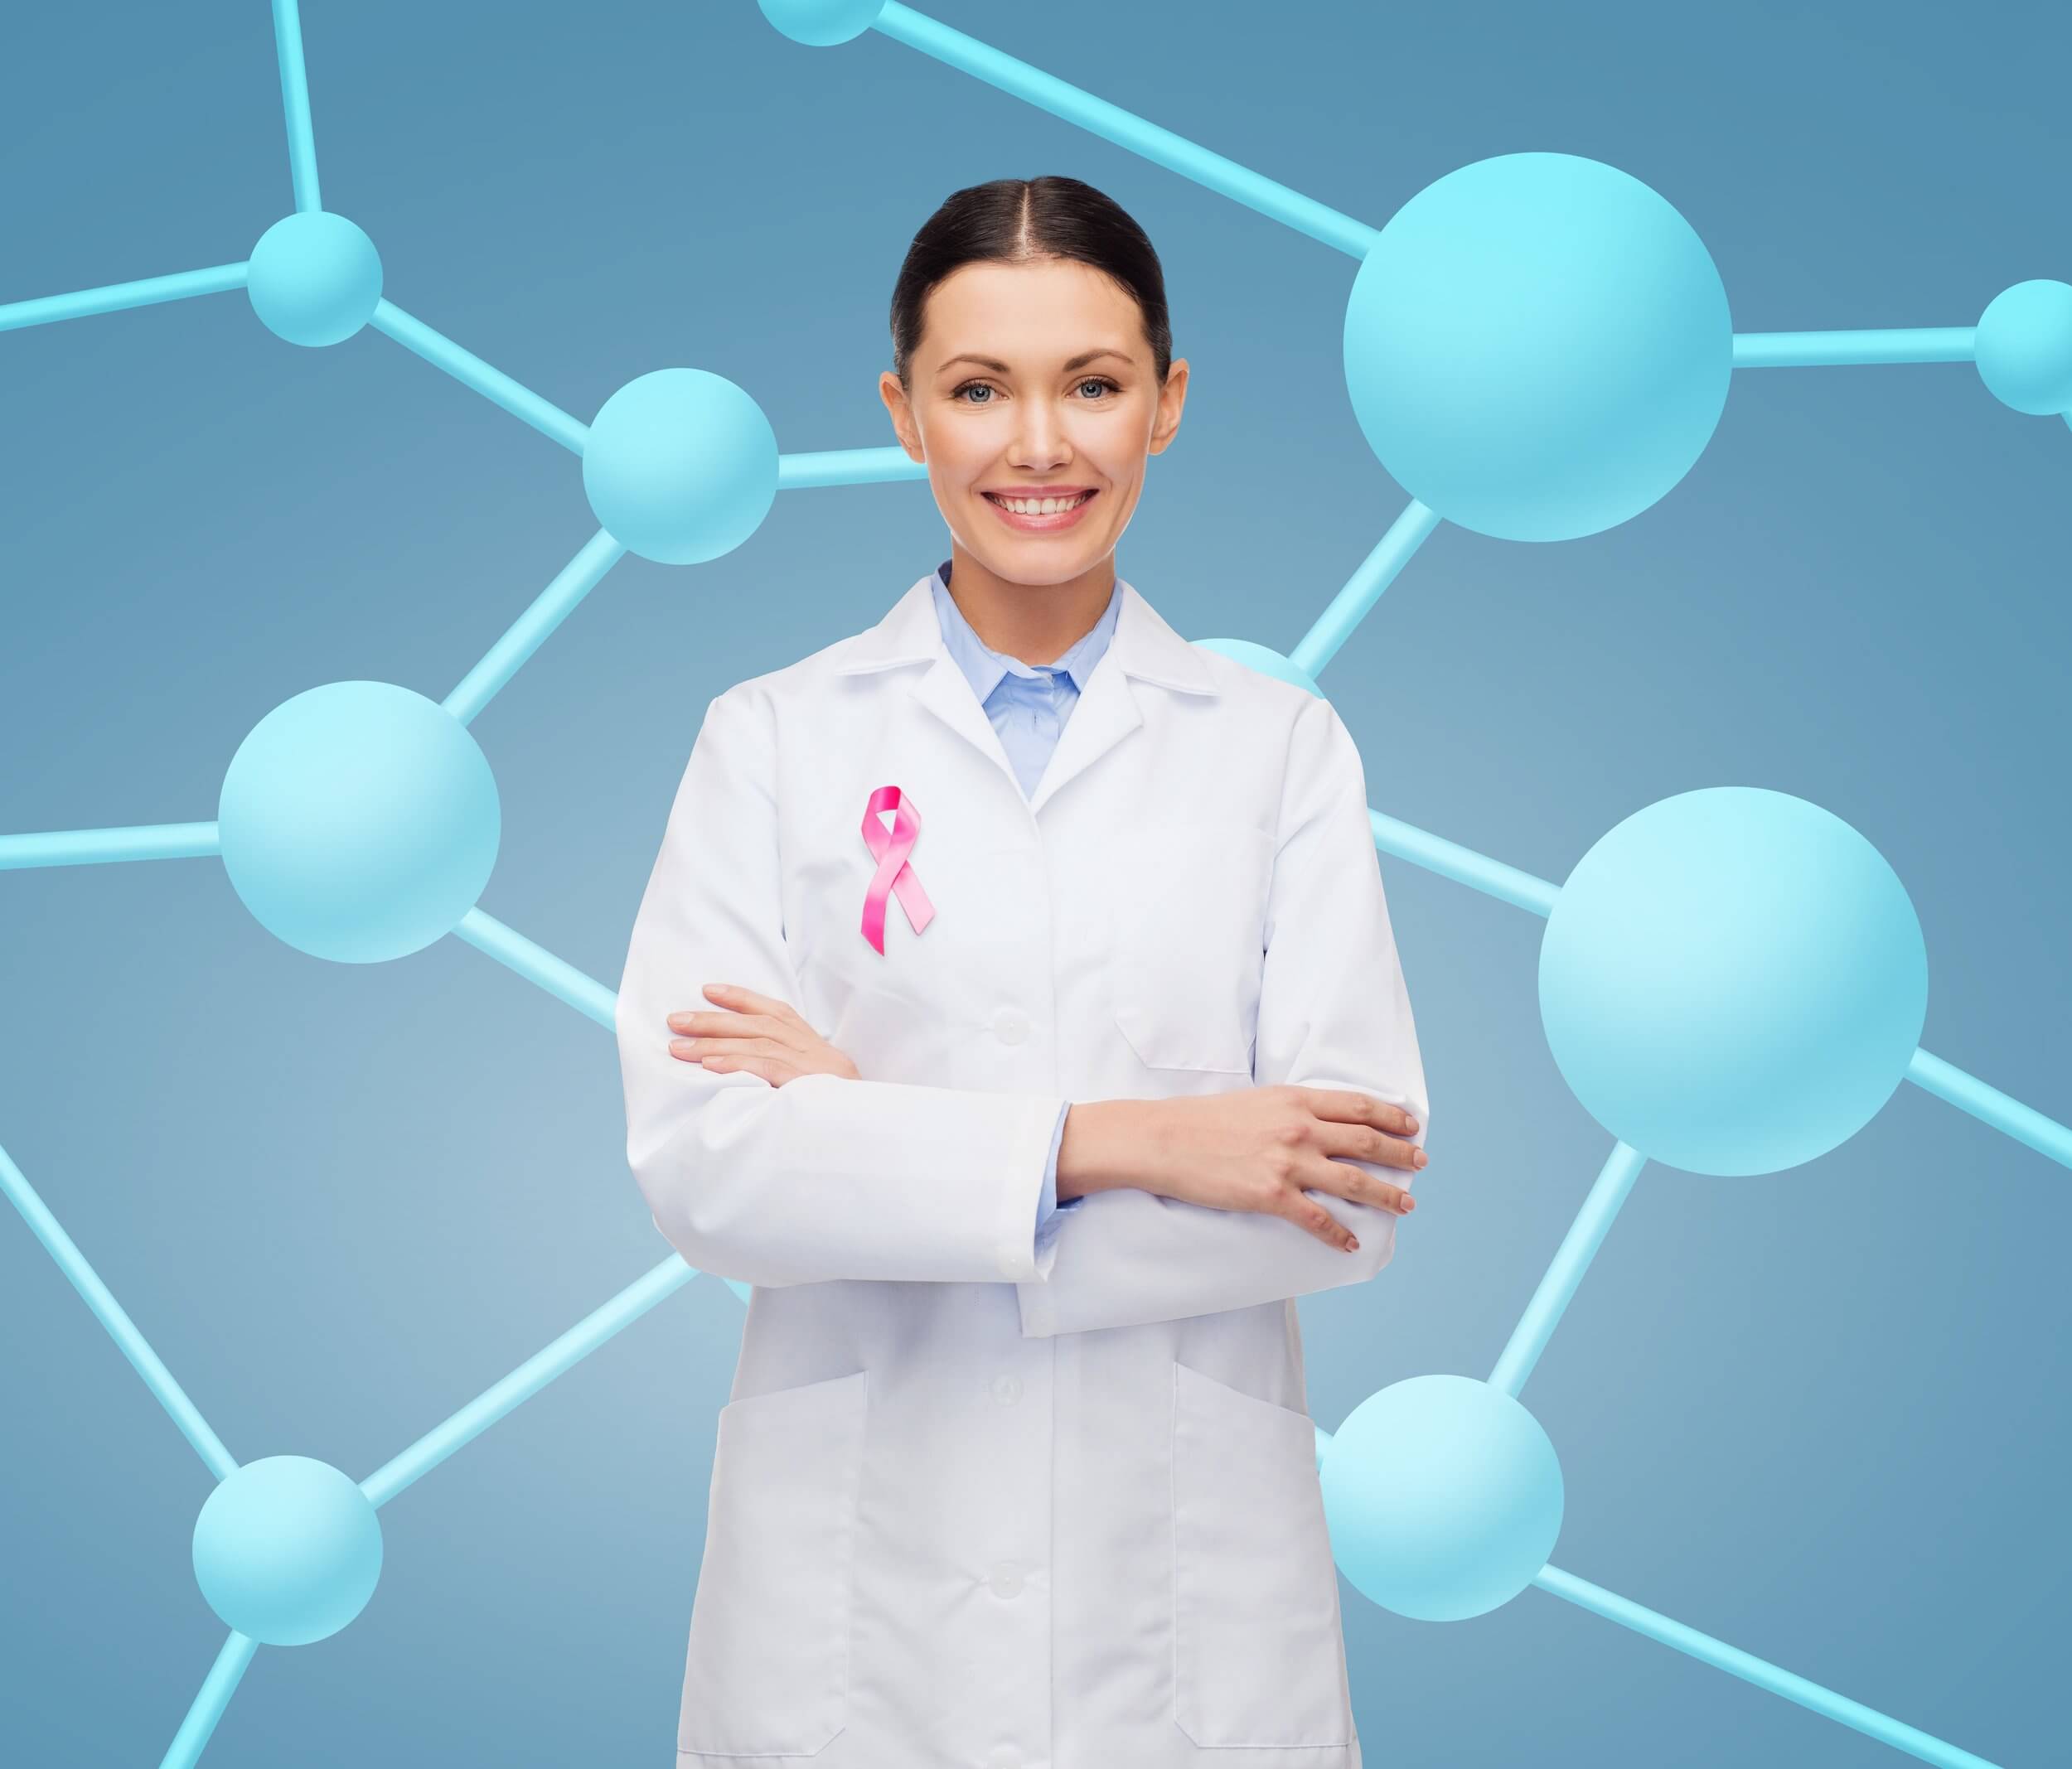 Clinical Pharmacists’ Role In Breast Cancer Treatment For Older Women